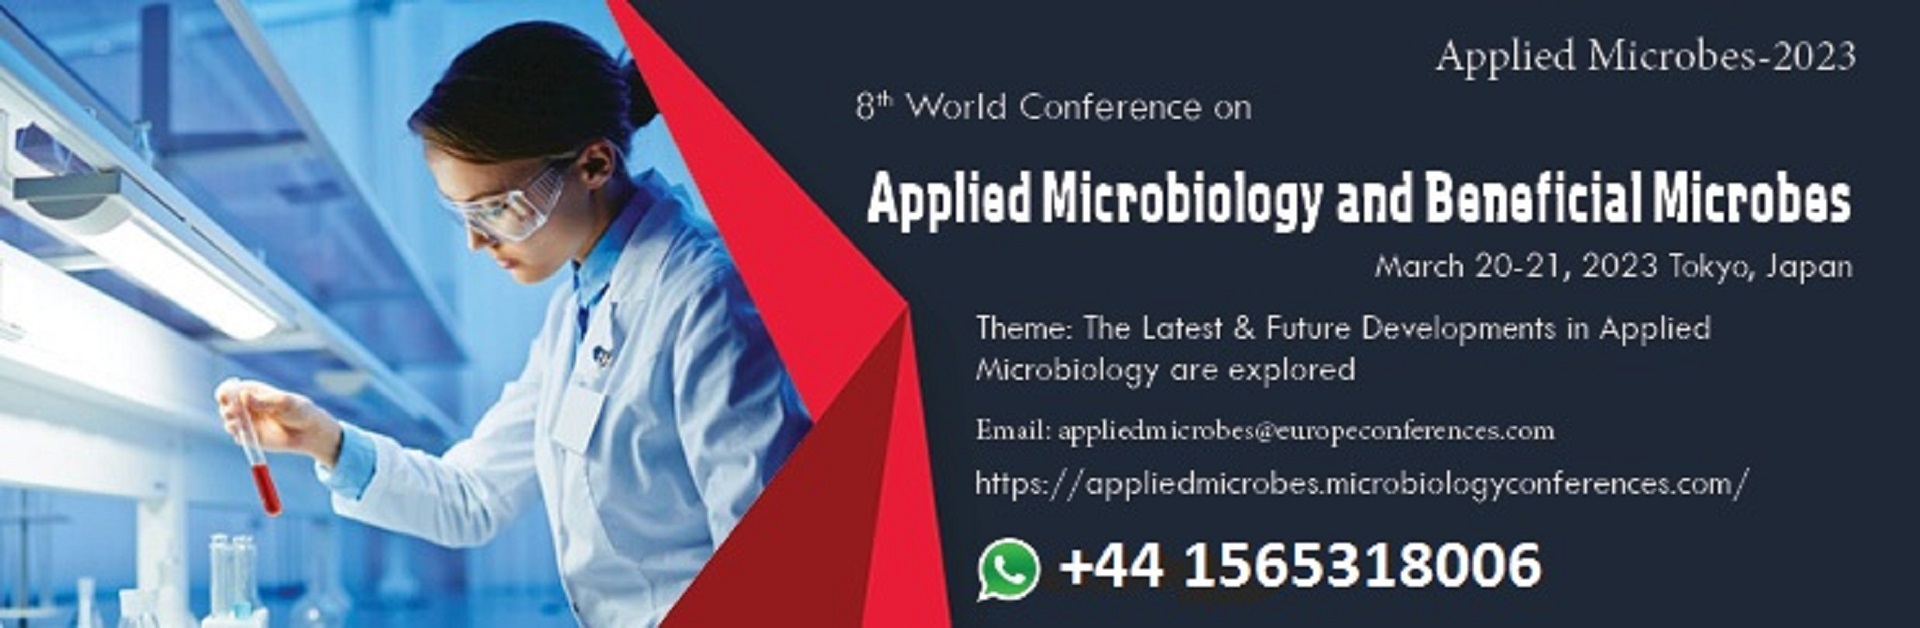 8th World Conference on Applied Microbiology and Beneficial Microbes Conference Banner